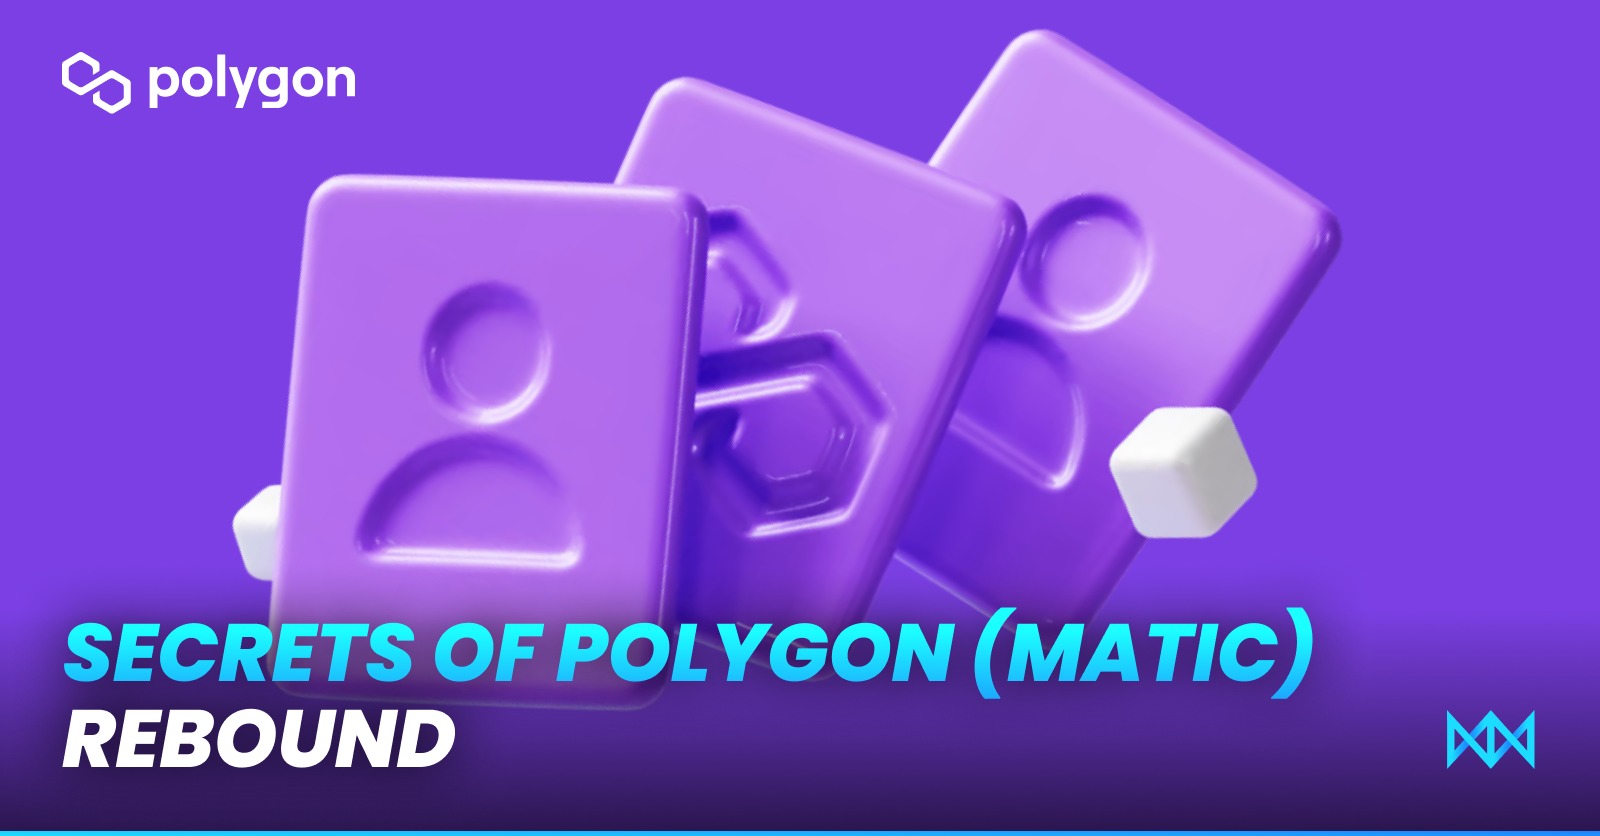 Polygon Reached Carbon Neutrality and its Token MATIC Gained 233% in Past Month